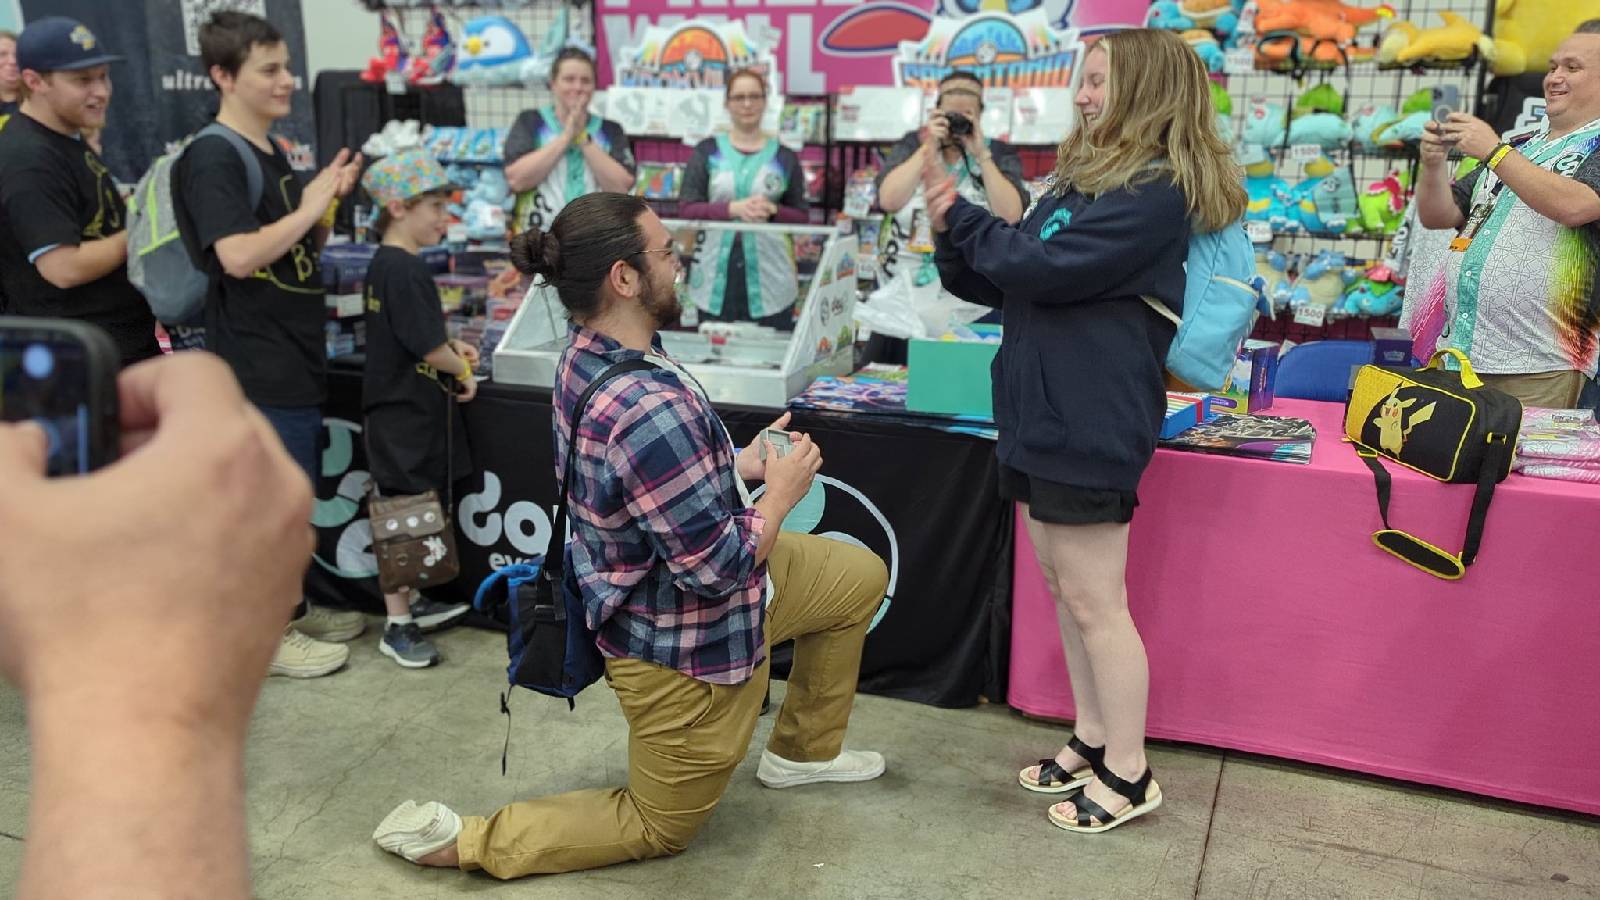 A photograph taken at Pokemon Indiana Regionals shows a man proposing to a woman